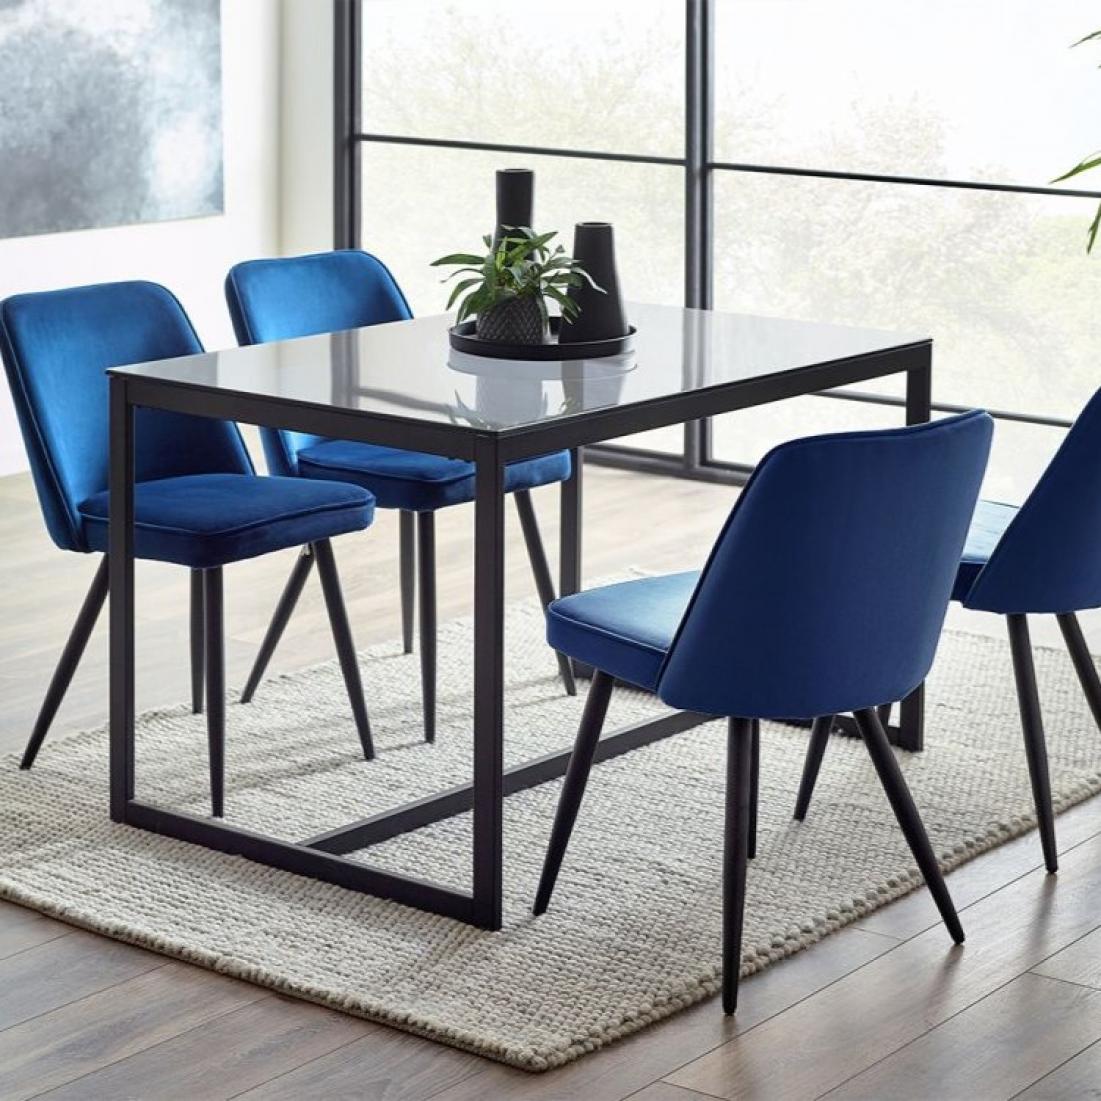 Chicago dining table with 4 Burgess blue chairs